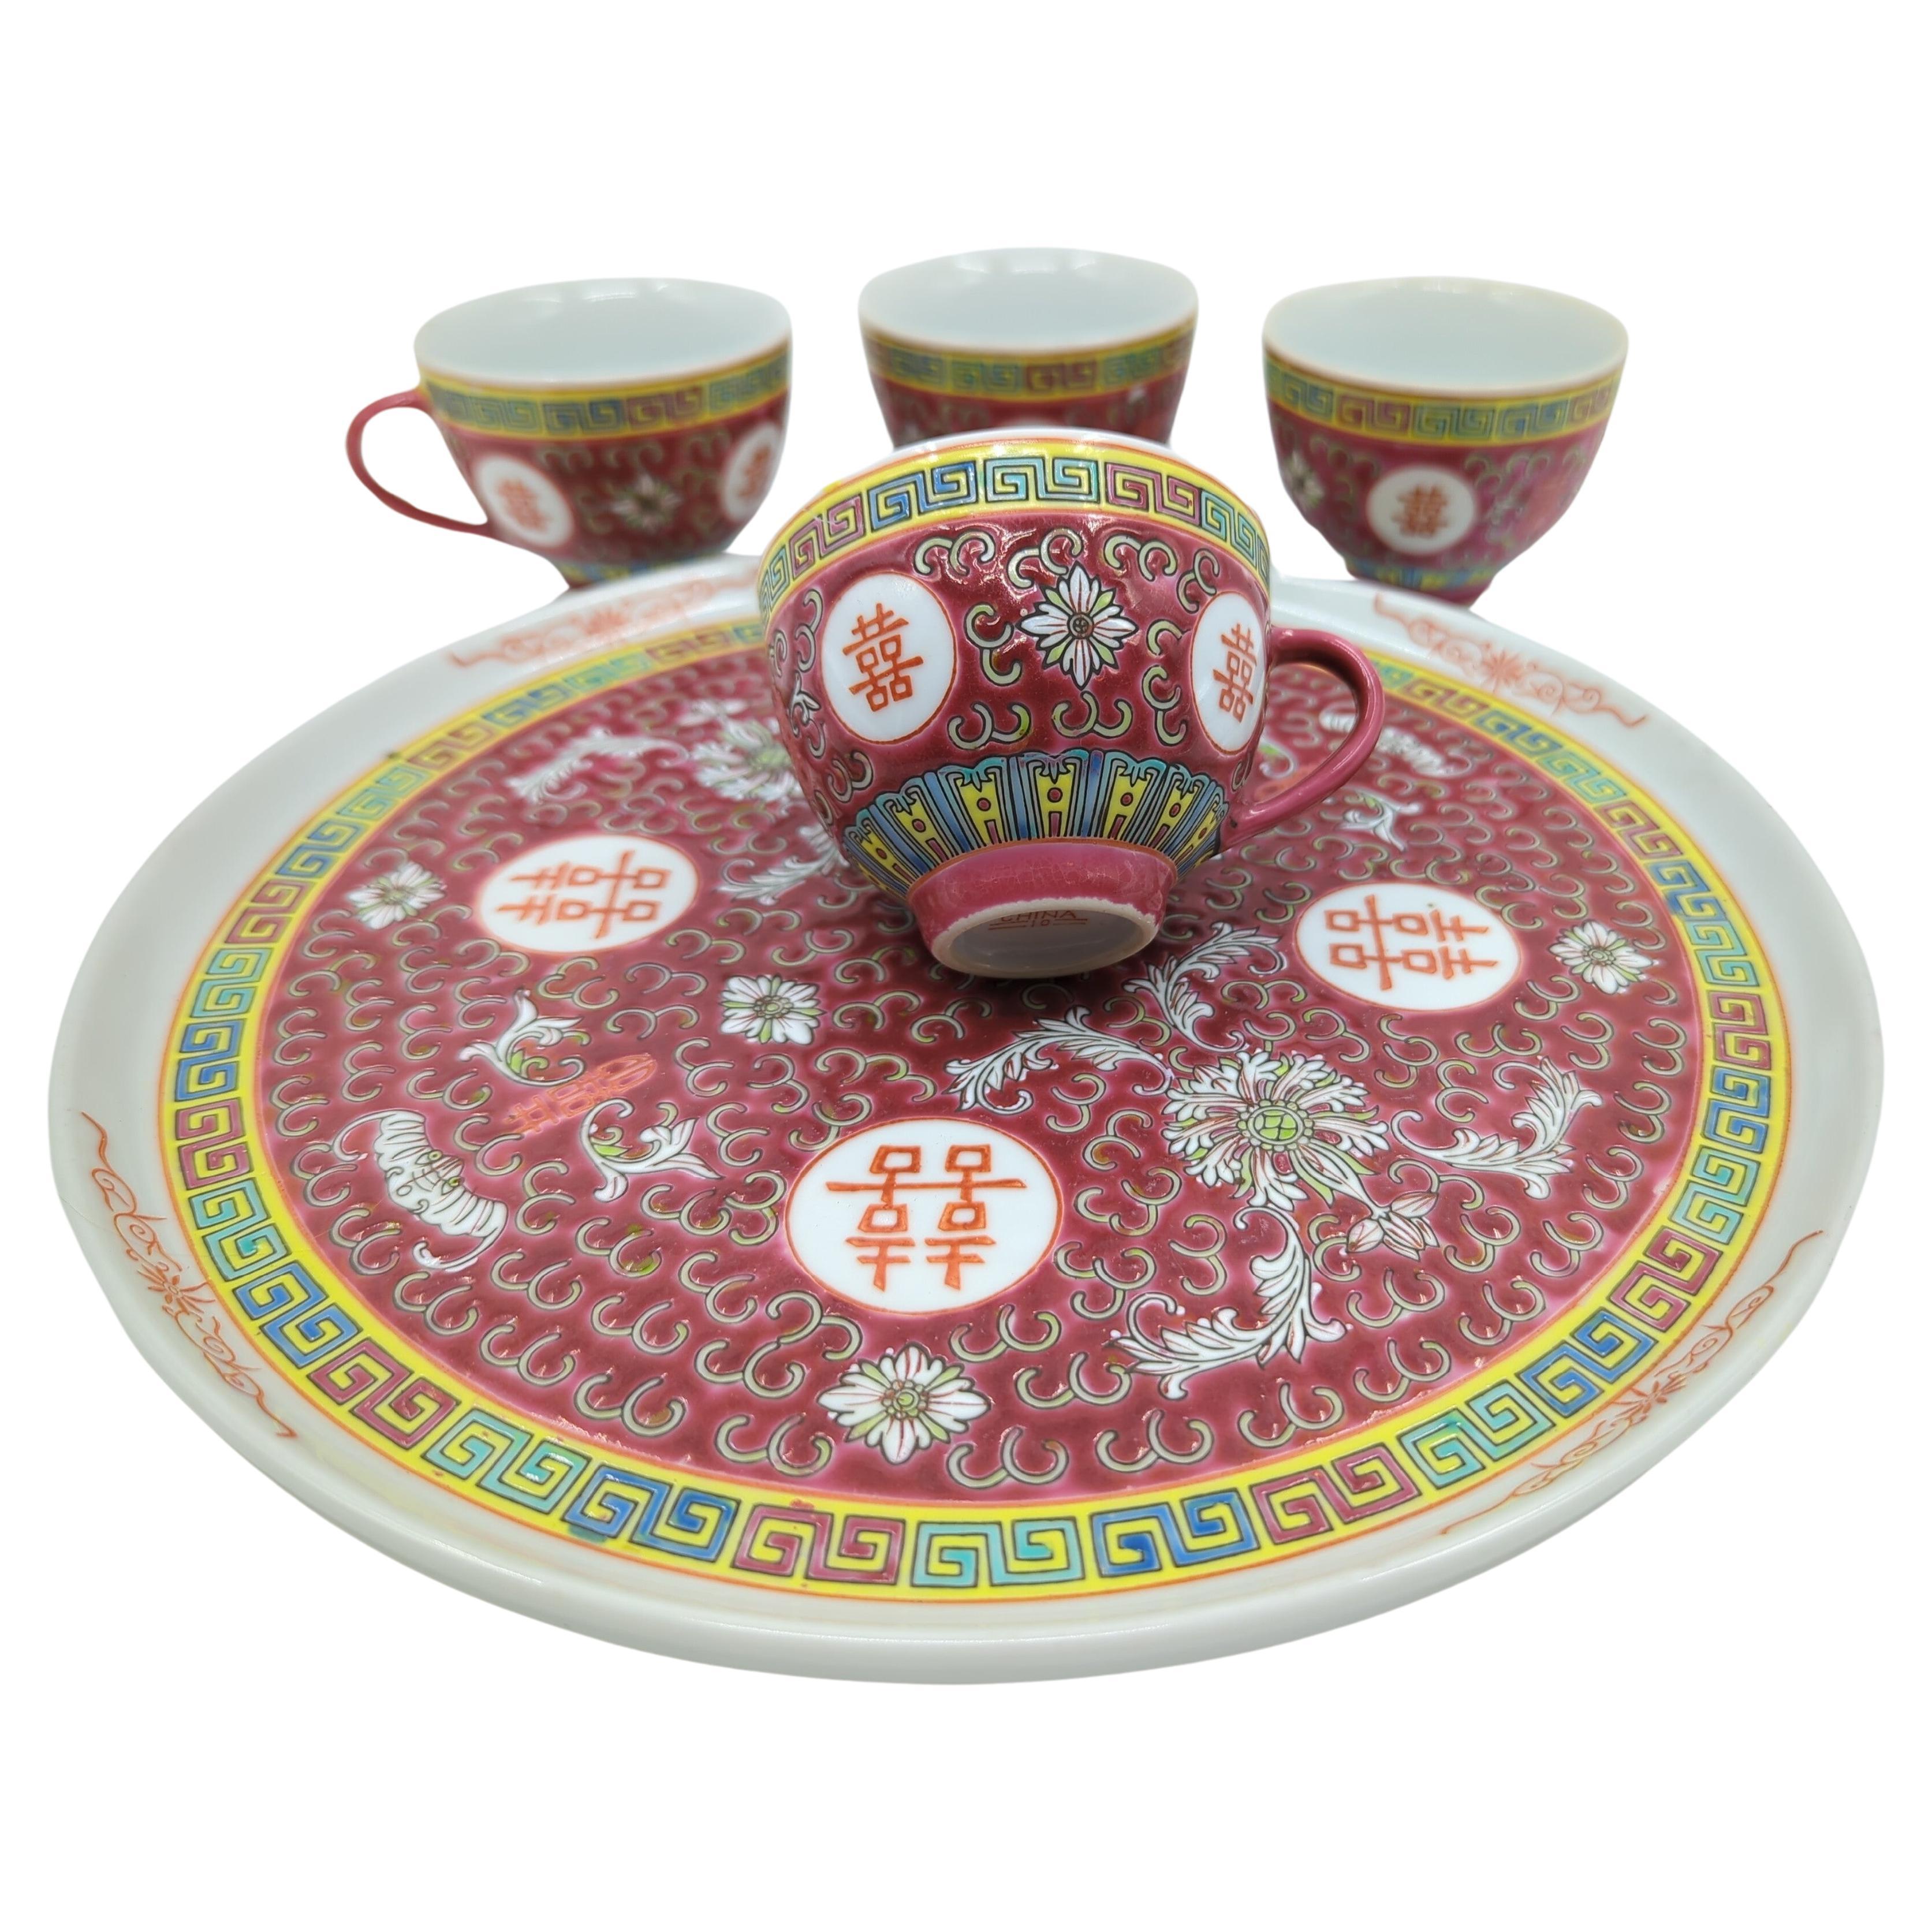 We are honored to offer this exceptional Chinese porcelain tea set, specifically designed for marriage ceremonies and originating from Jingdezhen's Factory 10, circa 1970s. Comprising four tea cups and a coordinating circular tray, this set is a